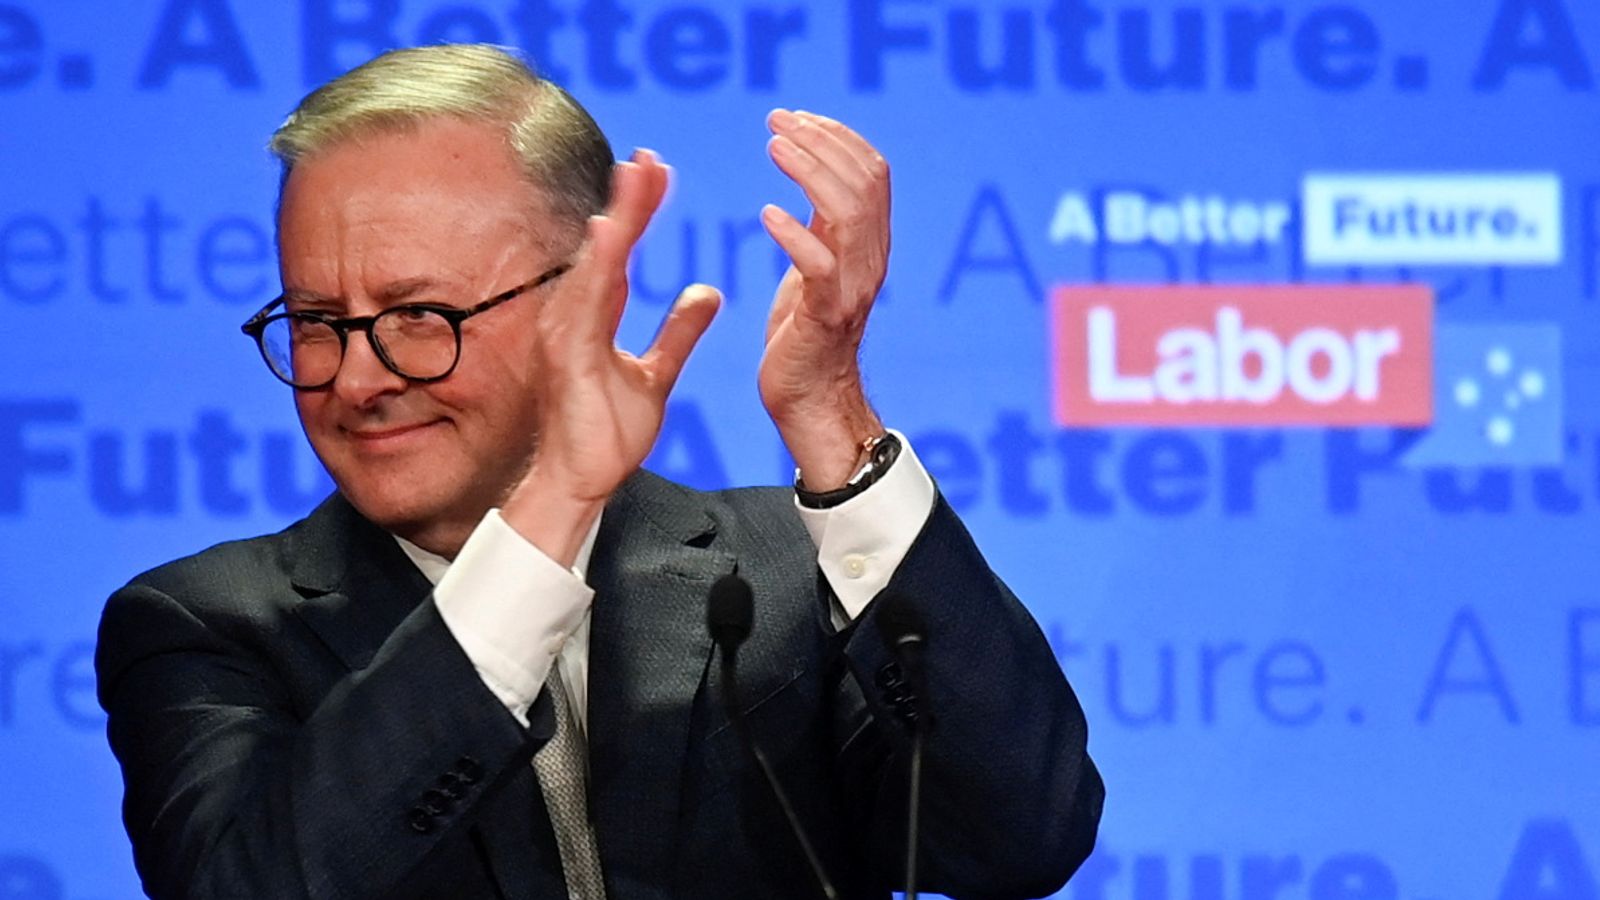 Australia elections: New PM Anthony Albanese pledges to unite country after Scott Morrison concedes defeat